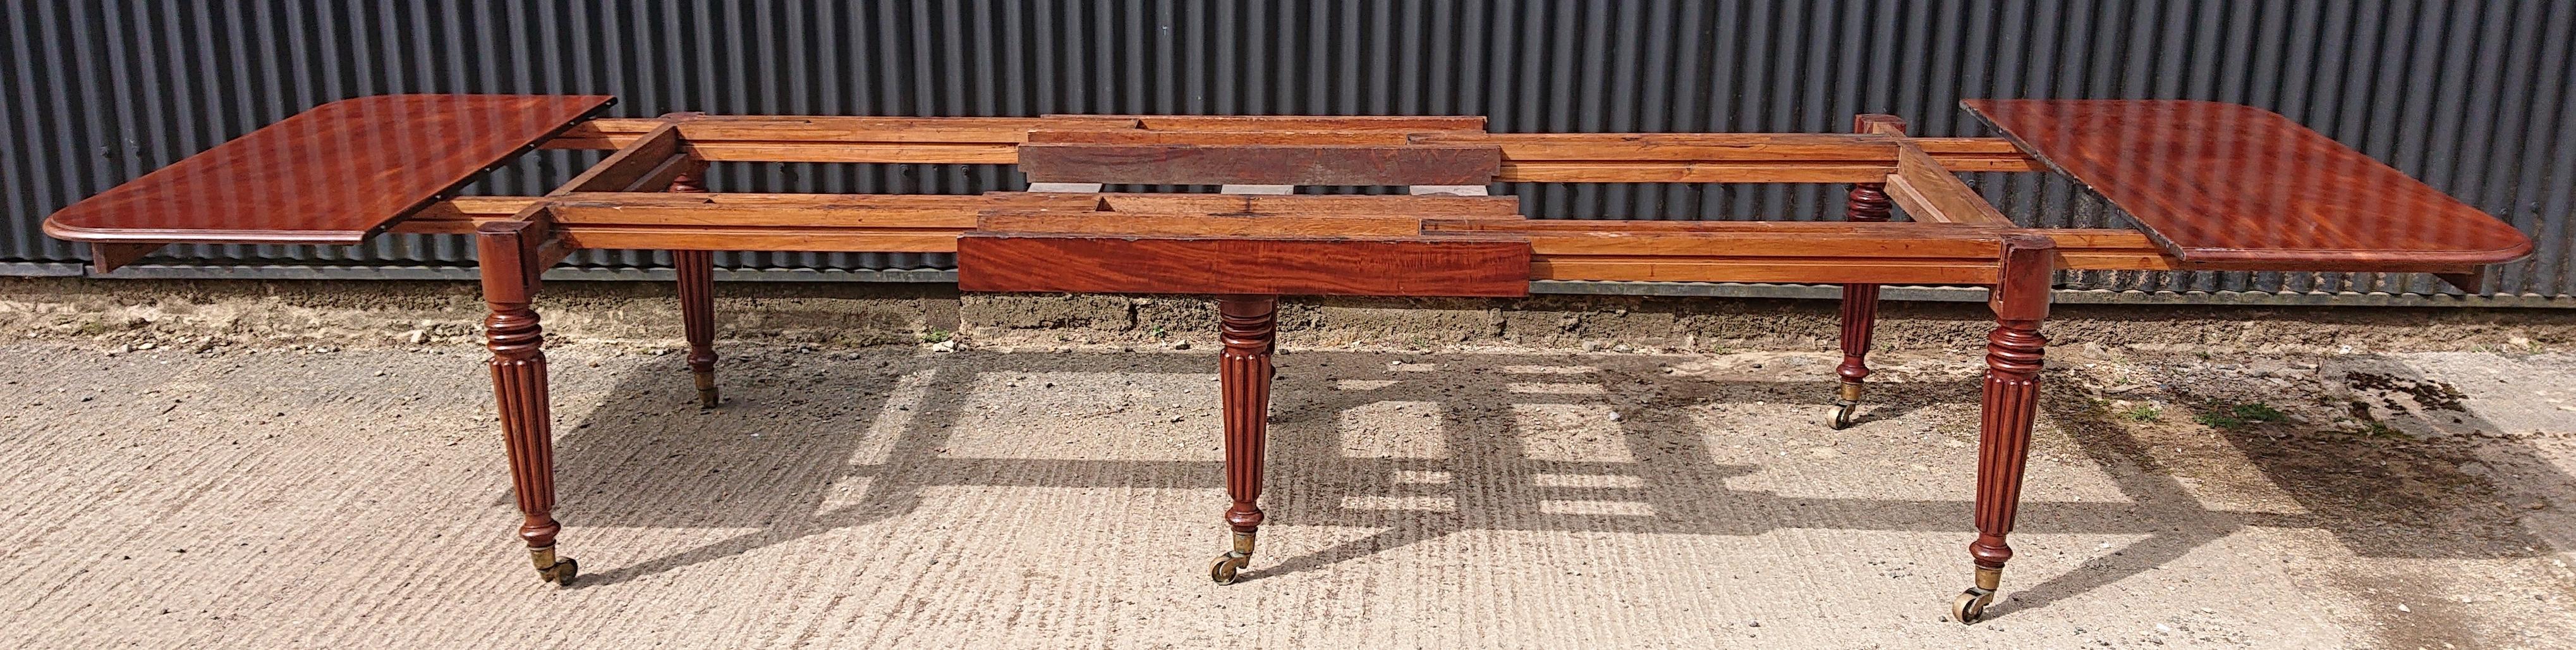 Early 19th Century Regency Mahogany Extending Dining Table Attributed to Gillows For Sale 10